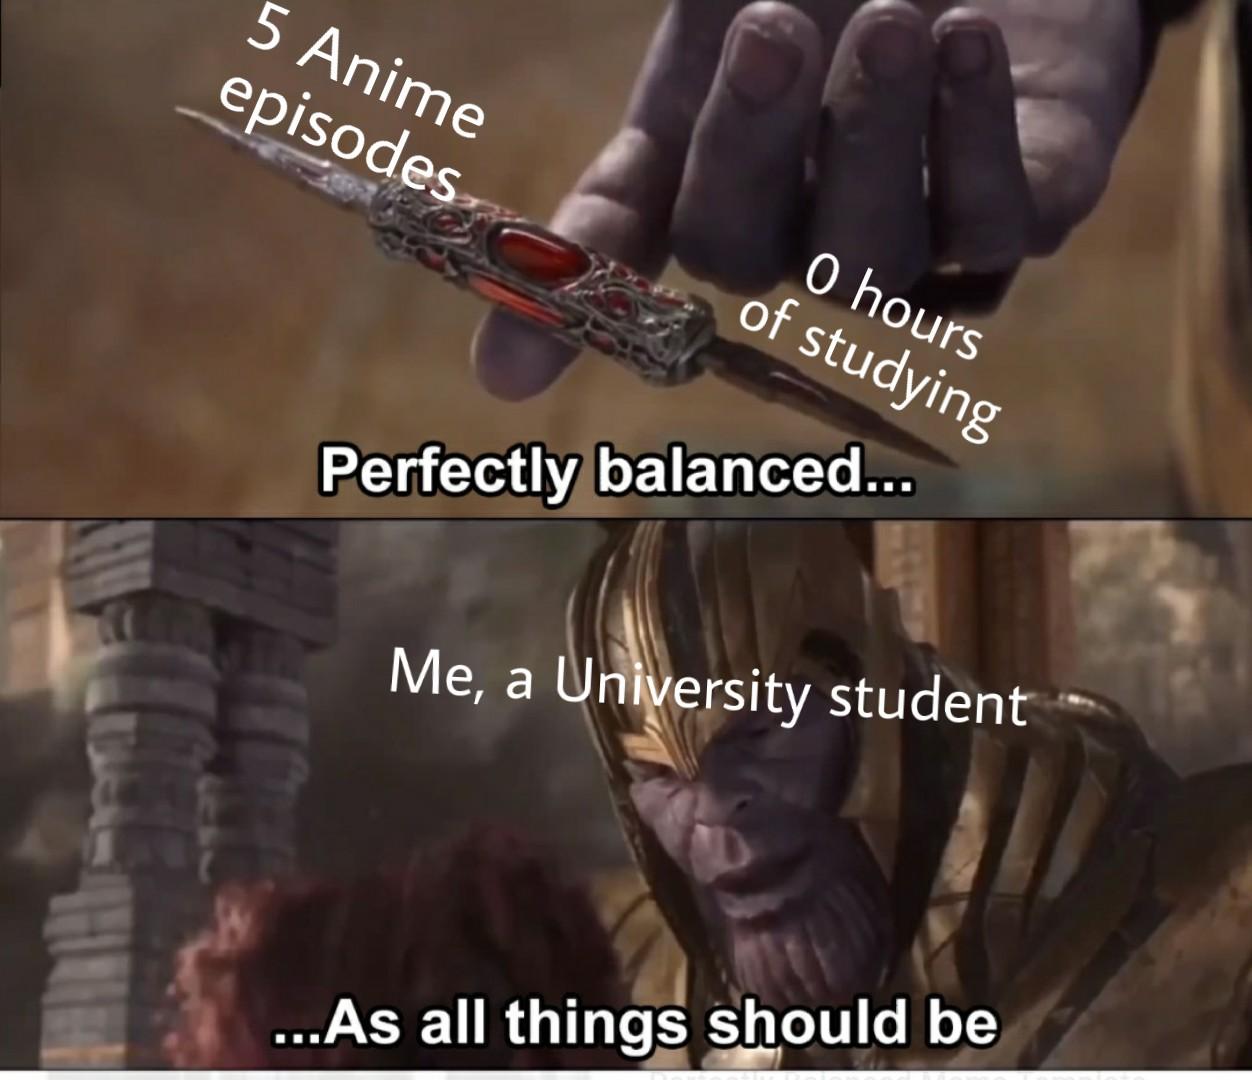 r/collegememes- college dank memes - thanos perfectly balanced meme - 5 Anime episodes O hours of studying Perfectly balanced... Me, a University student ...As all things should be